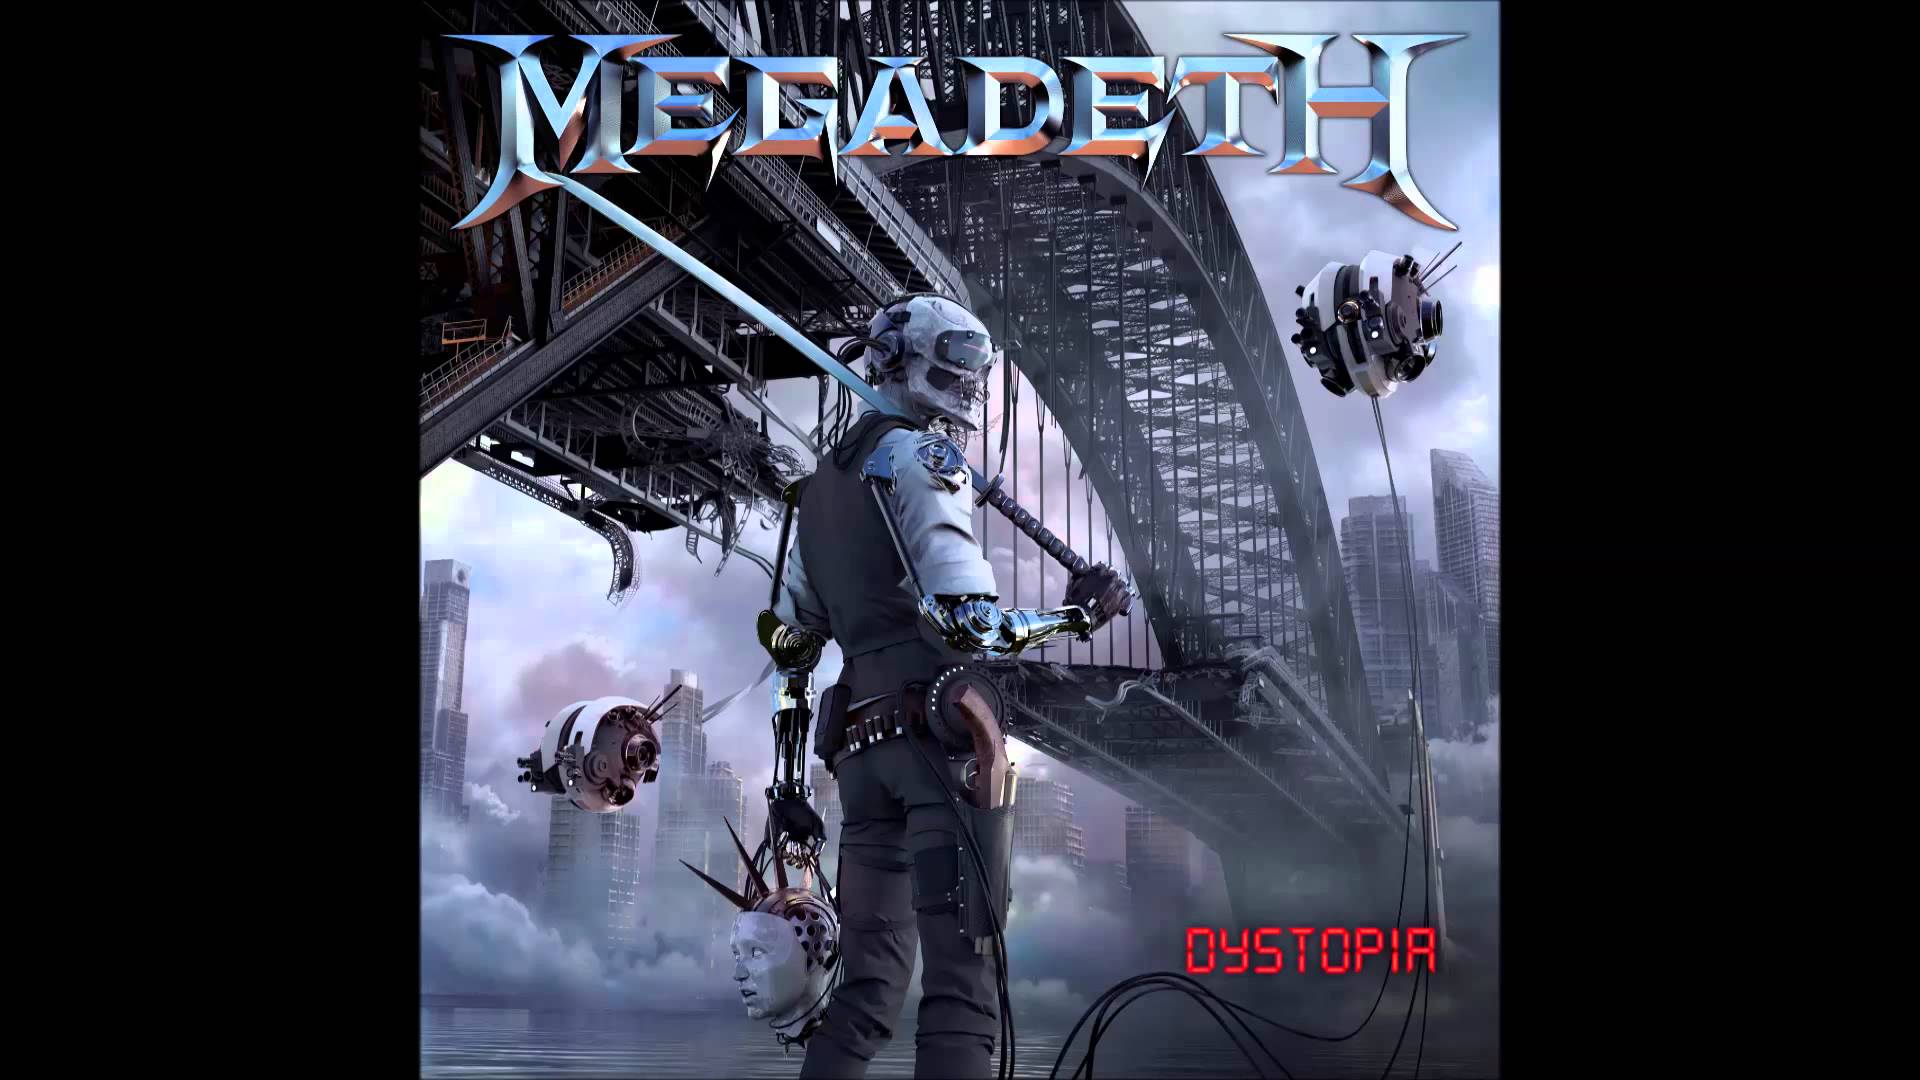 Megadeth - Foreign Policy